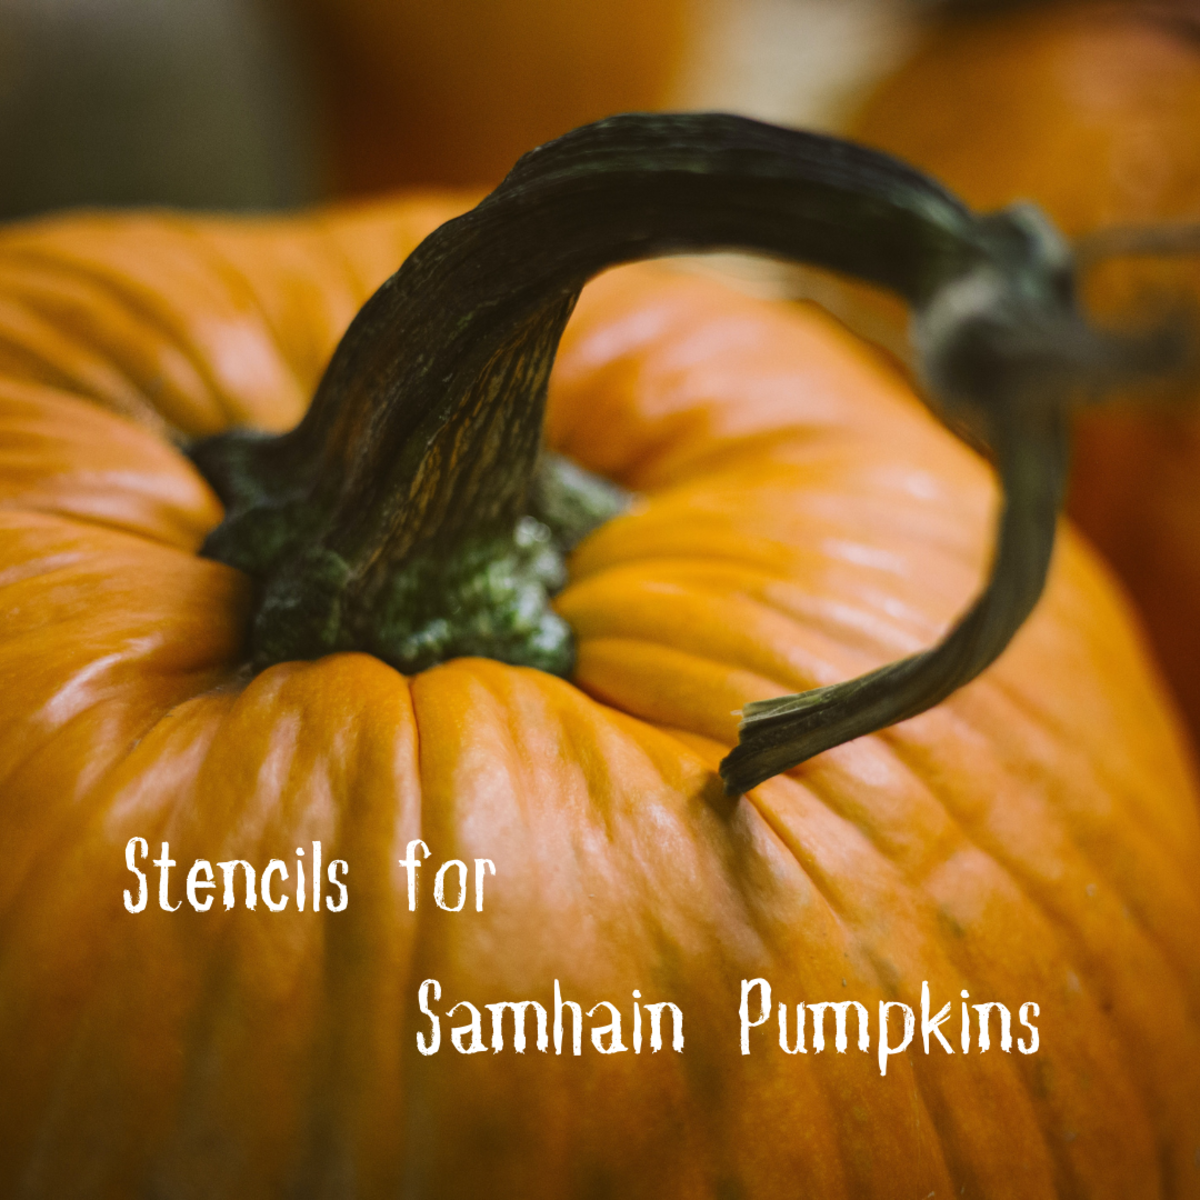 Print out these pagan pumpkin carving stencils and have a great Samhain.